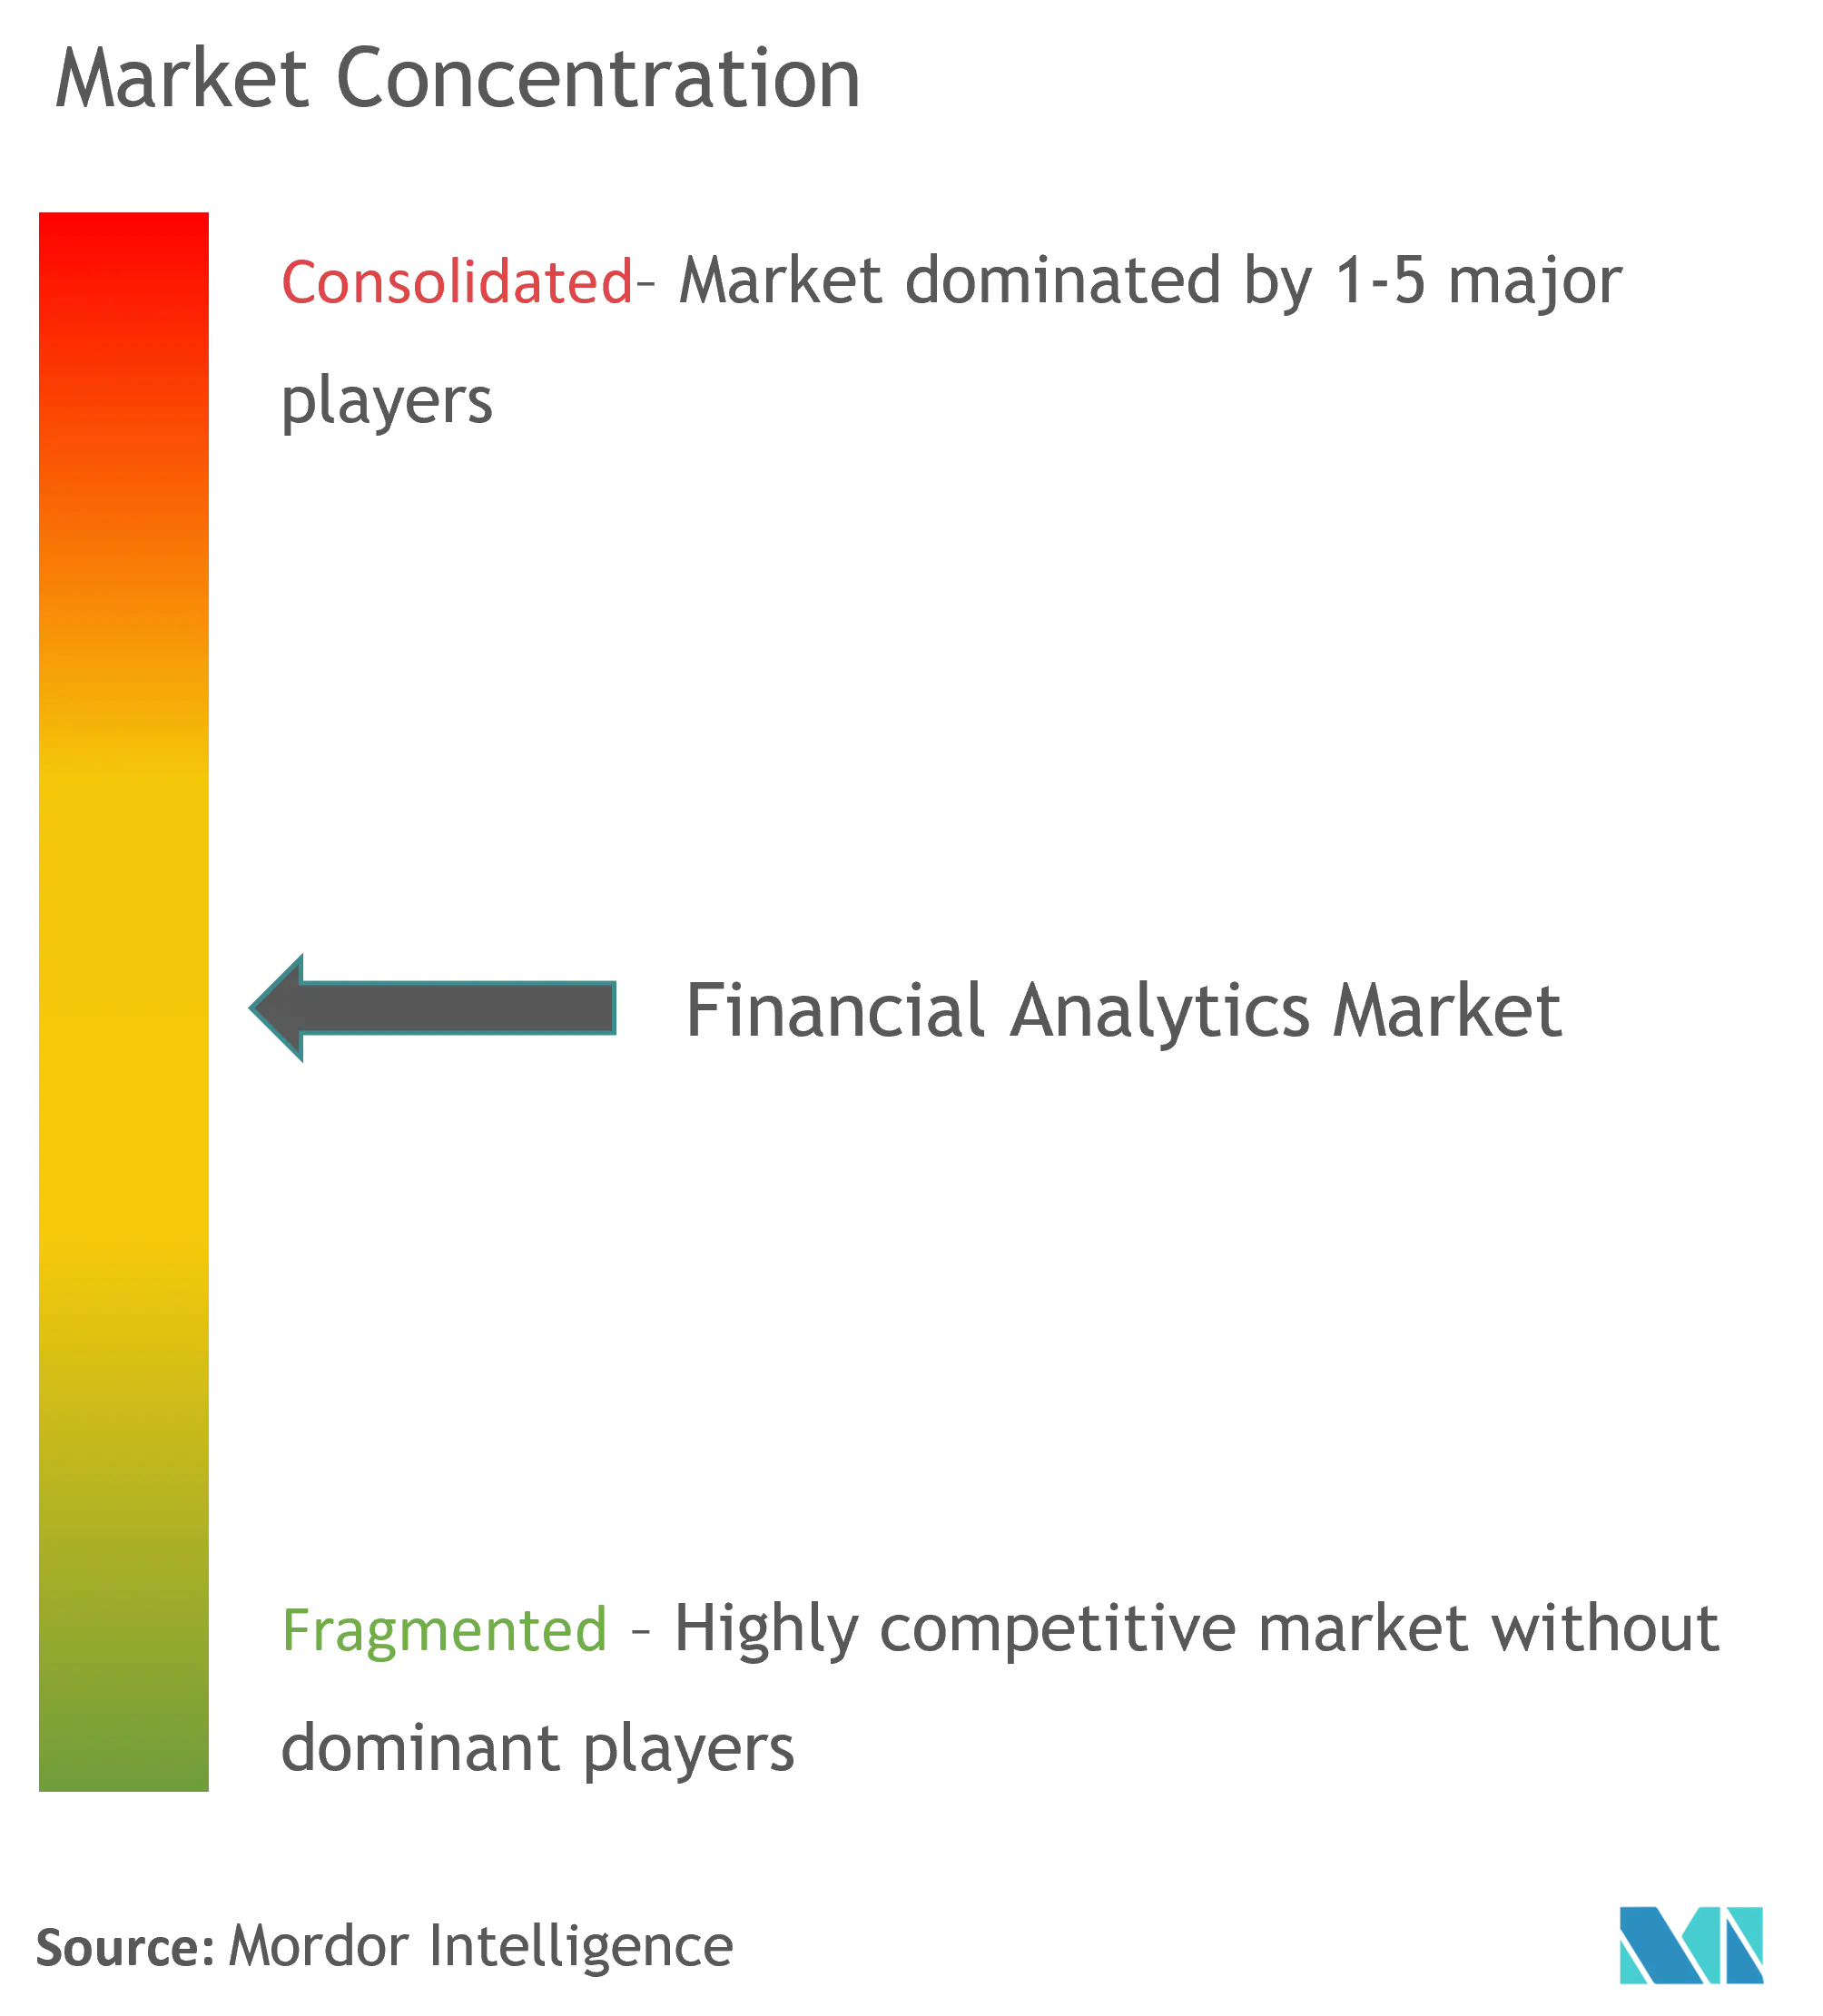 Financial Analytics Market Concentration